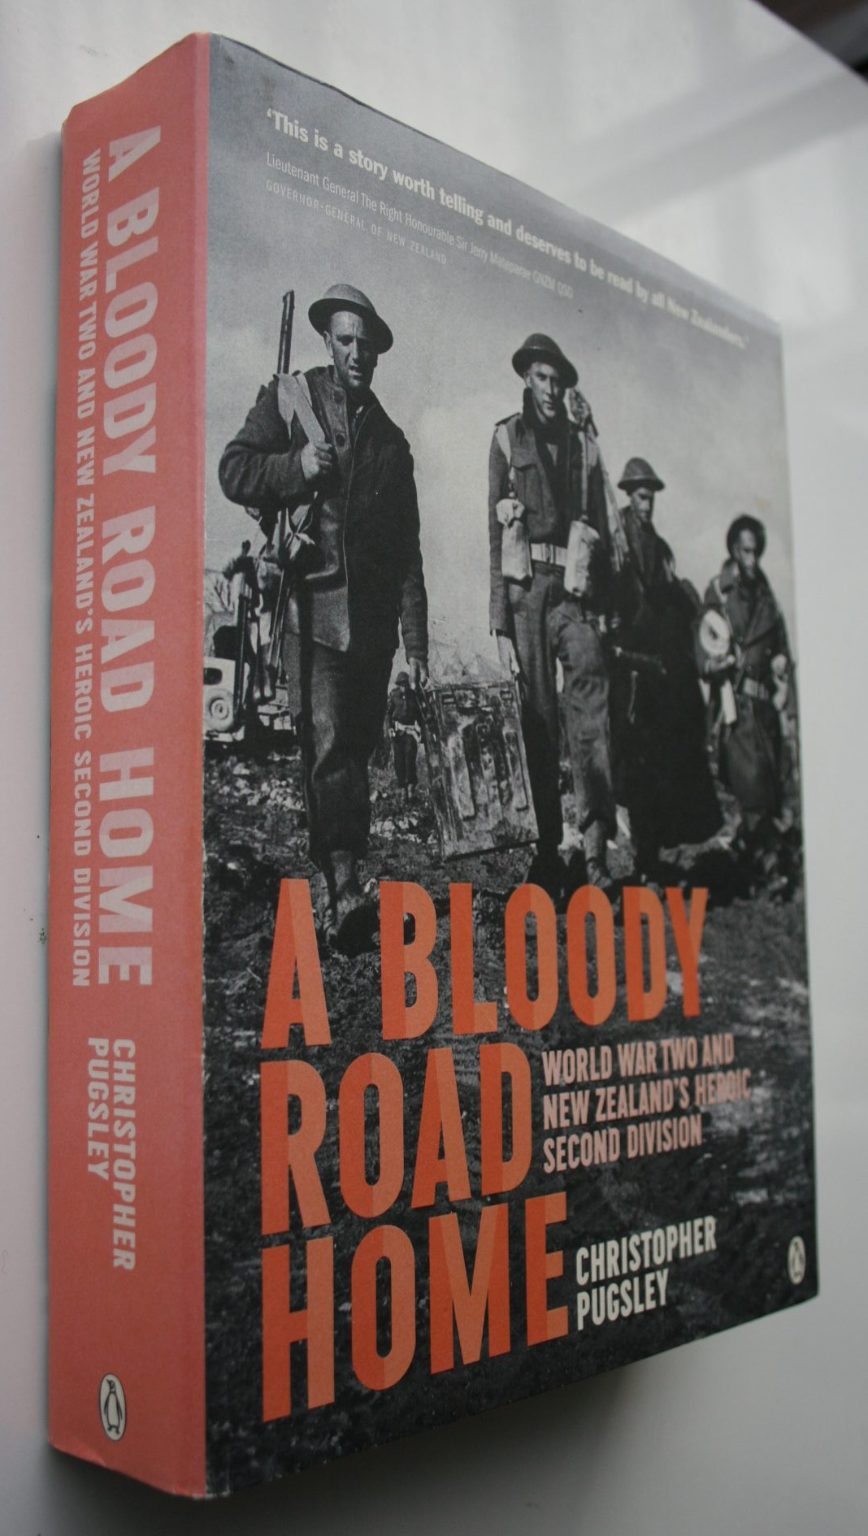 A Bloody Road Home: World War Two and New Zealand's Heroic Second Division by Christopher Pugsley.